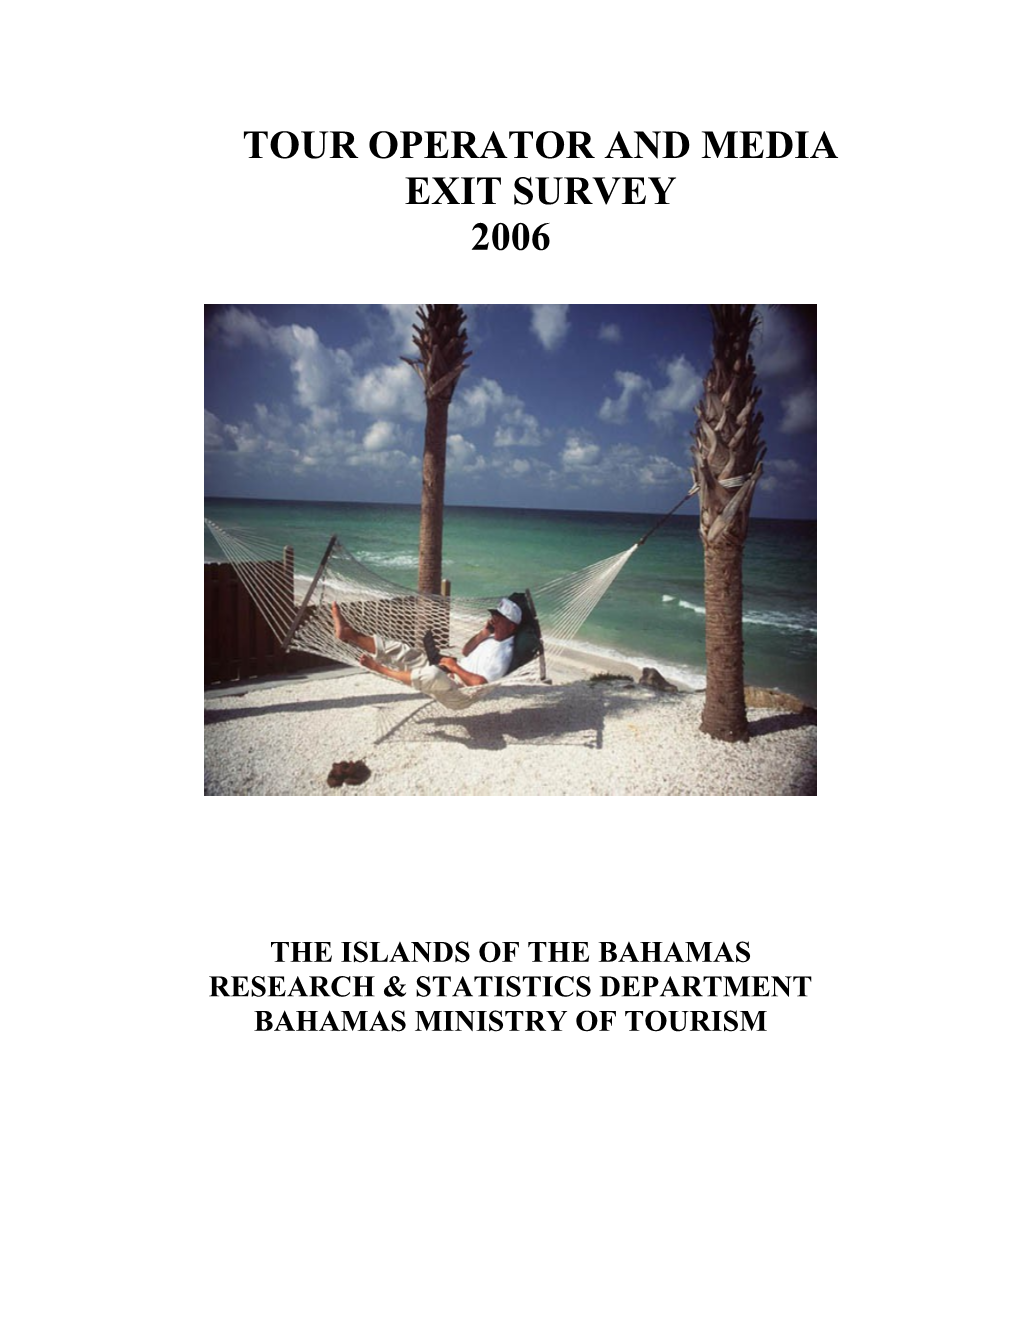 Tour Operator and Media Exit Survey